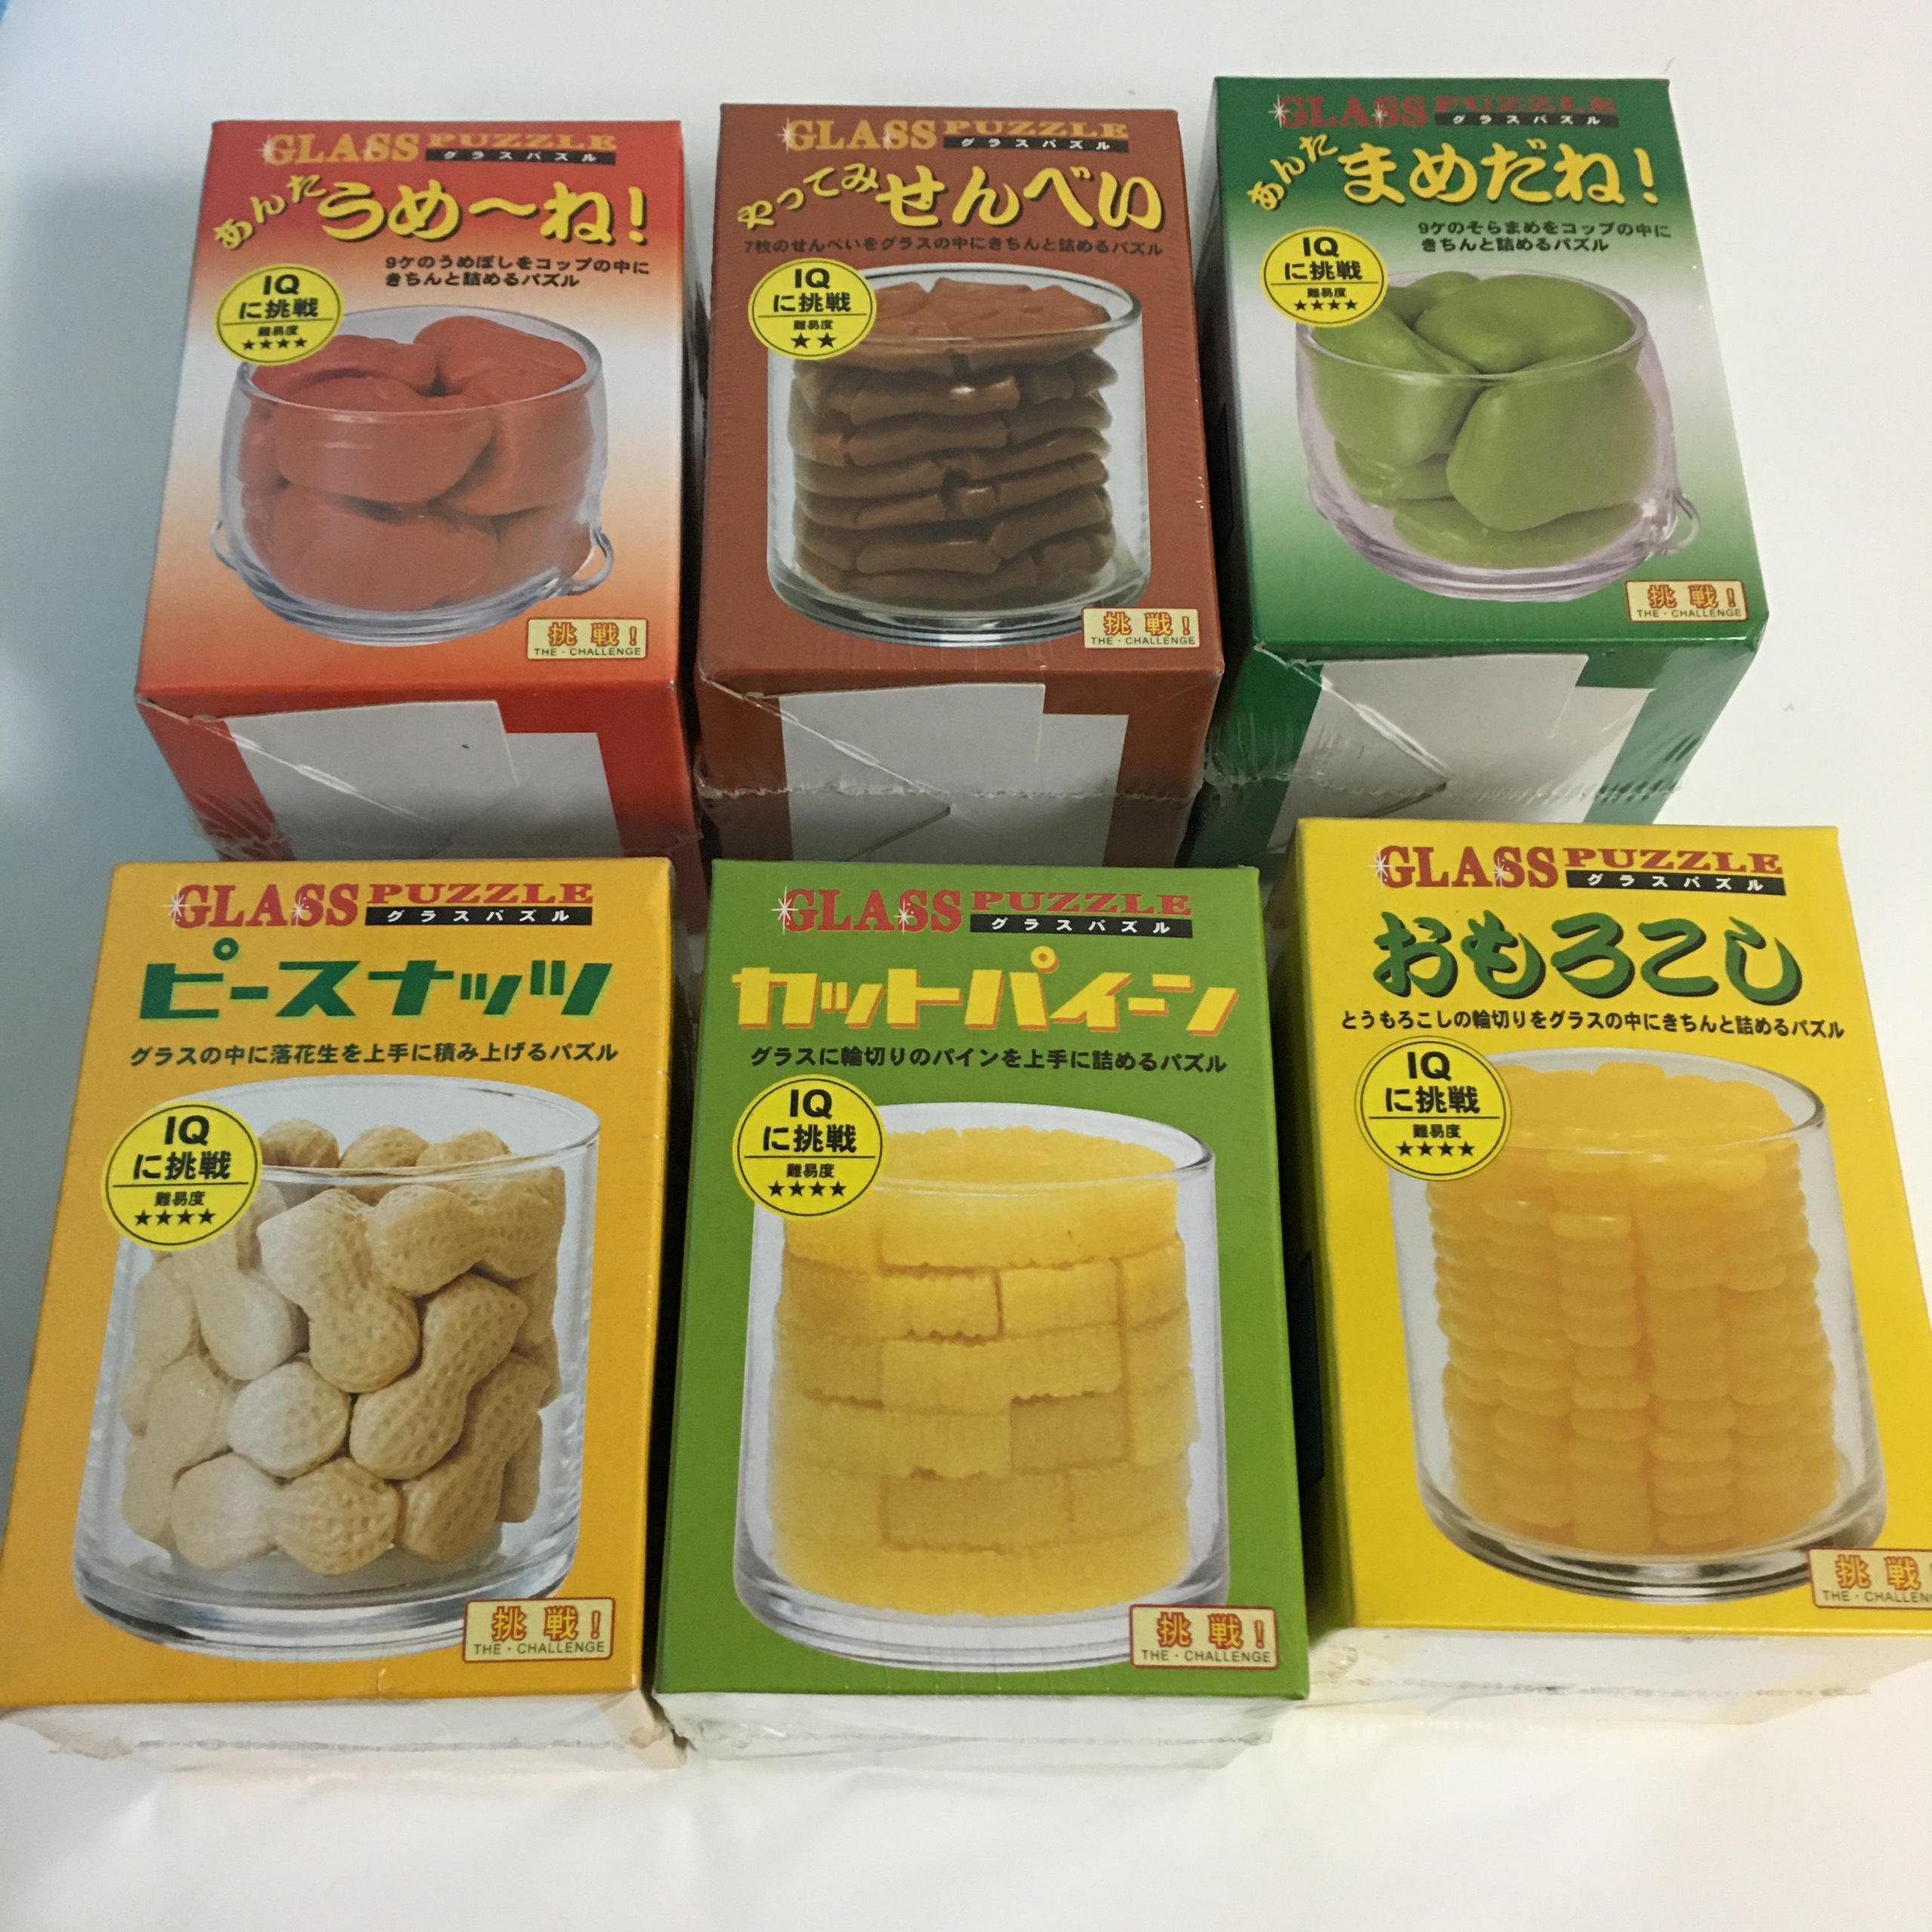 6 Glass Food Packing Puzzles made by Beverly.